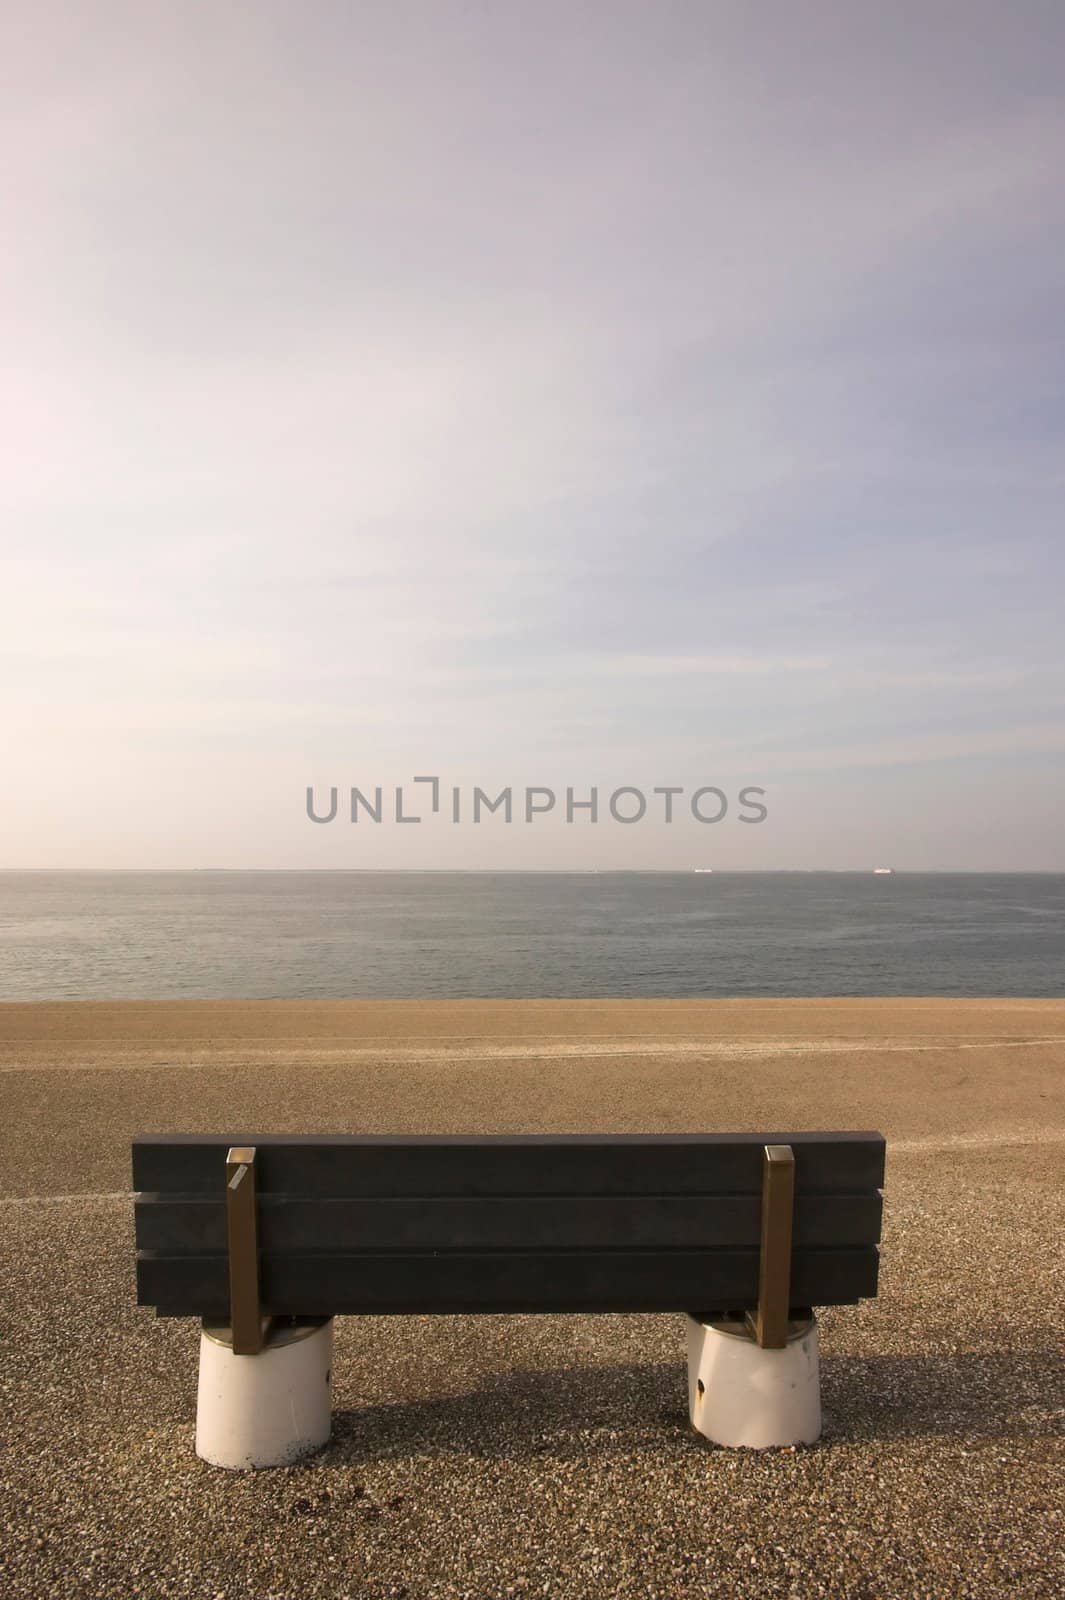 Wooden bench standing at the concrete covered seaside edge in Den Helder in Holland